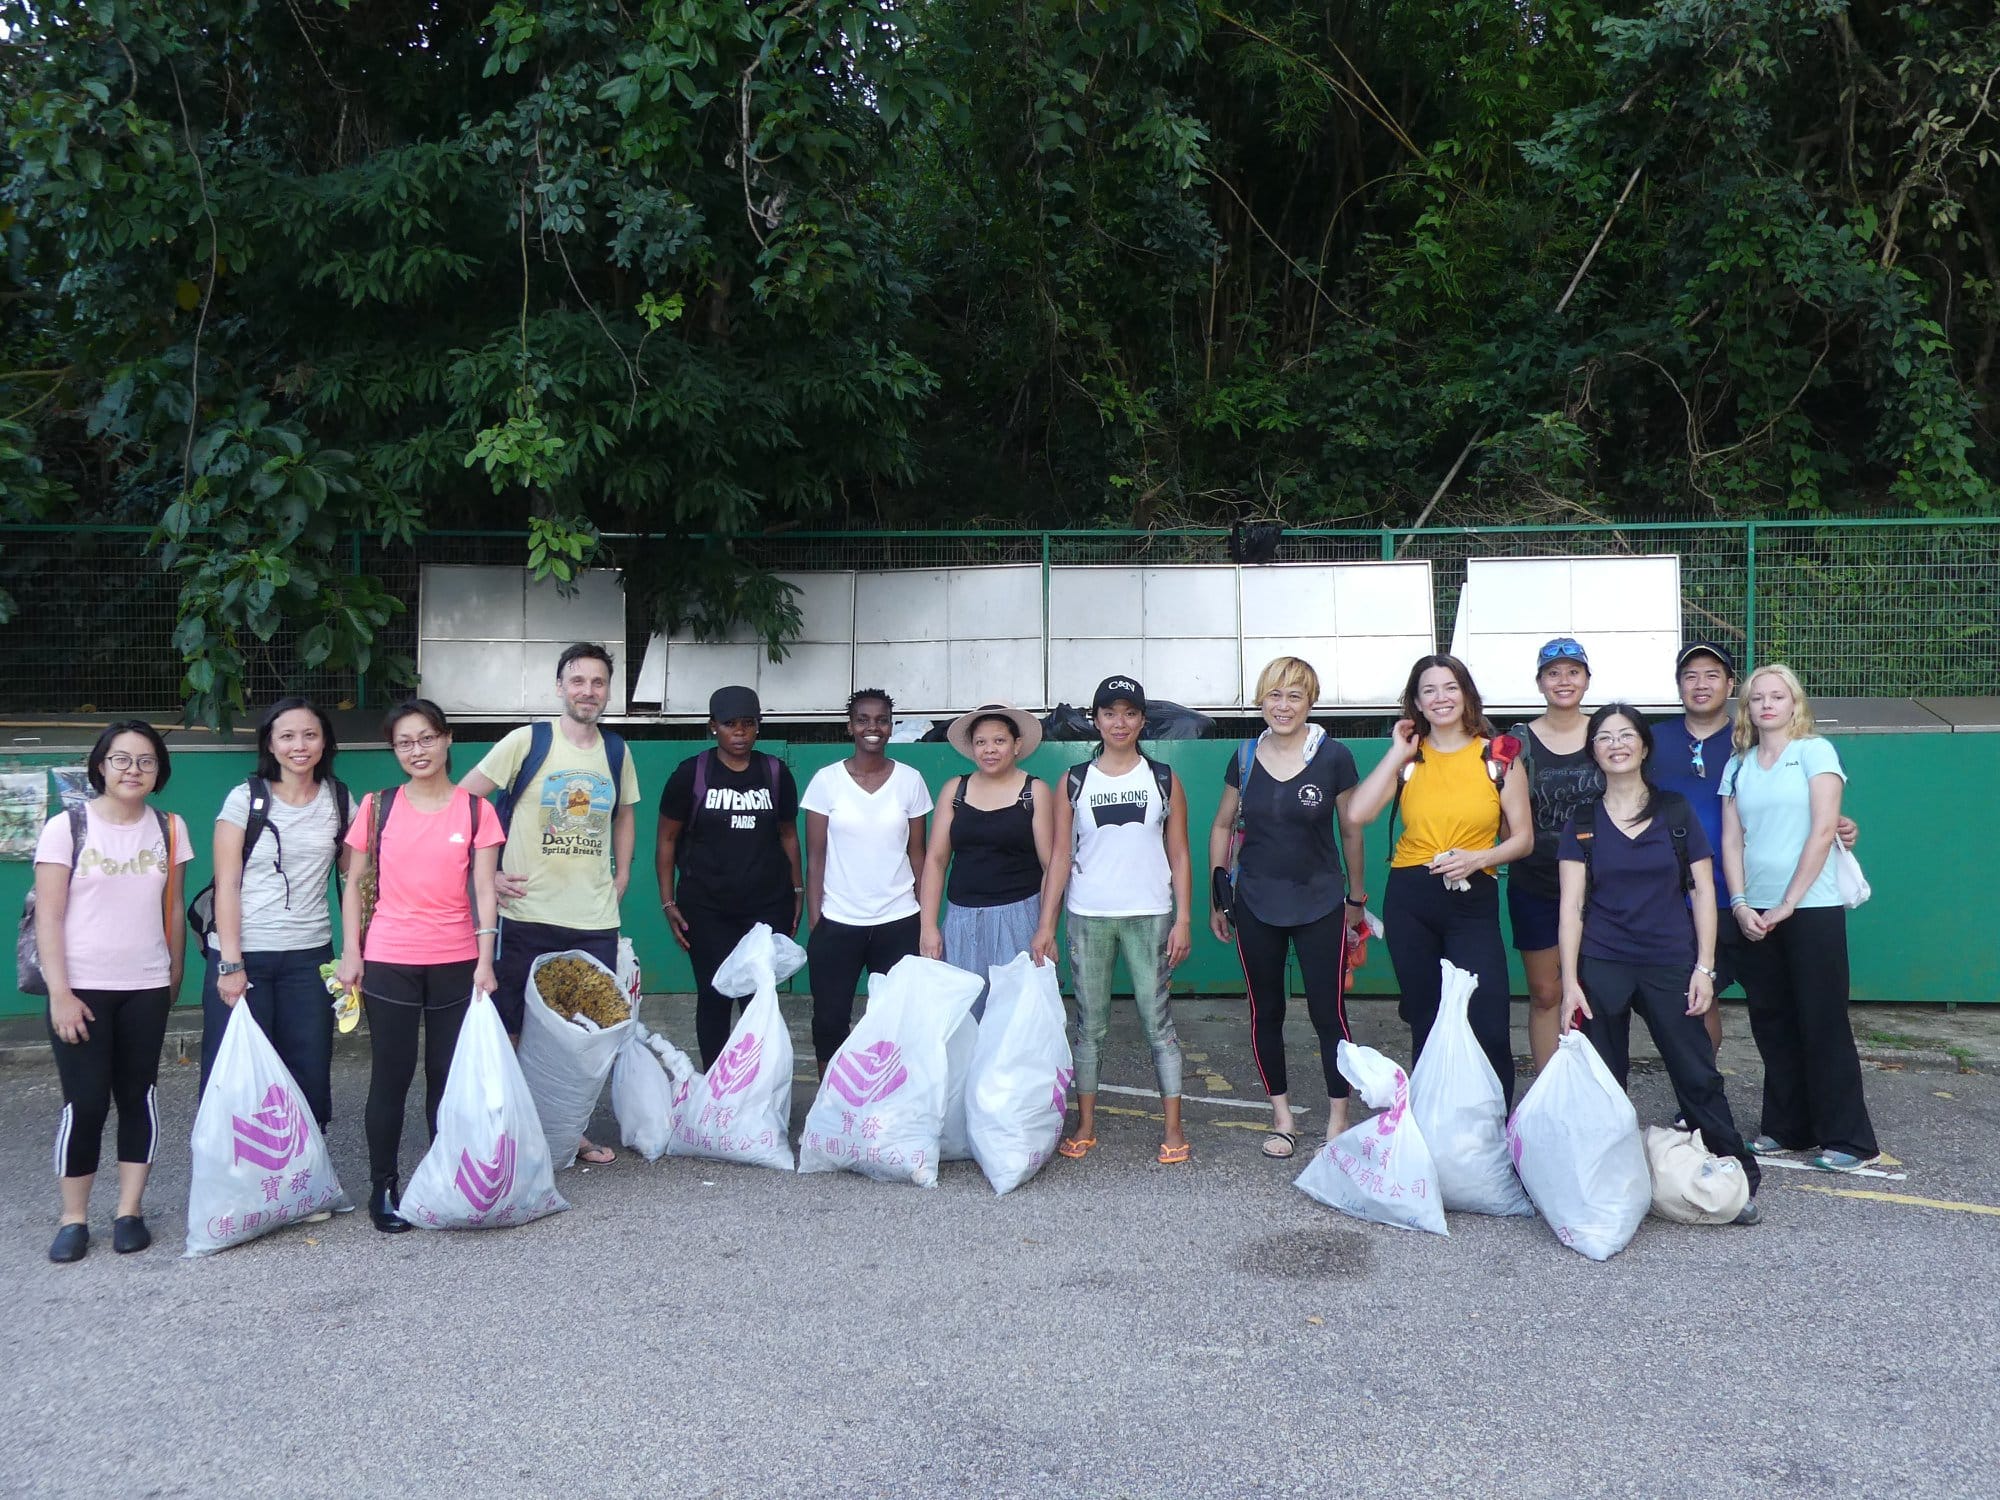 In our ecotours we also organize clean-ups to encourage our participants to protect the environment. Encompass hk; hong kong